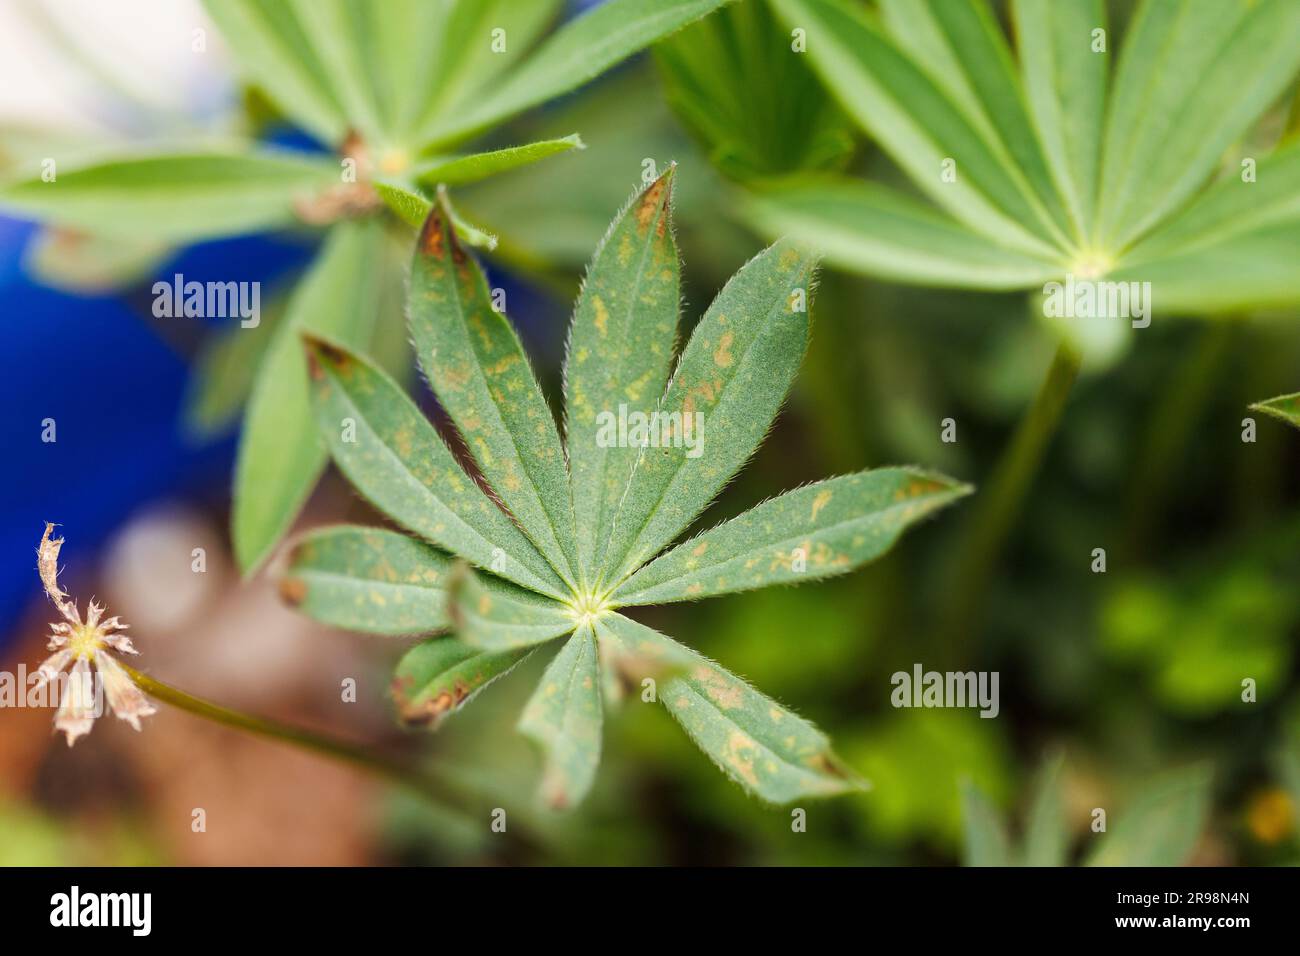 A vibrant green leaf of a lupin plant with subtle brown spotted patterning Stock Photo